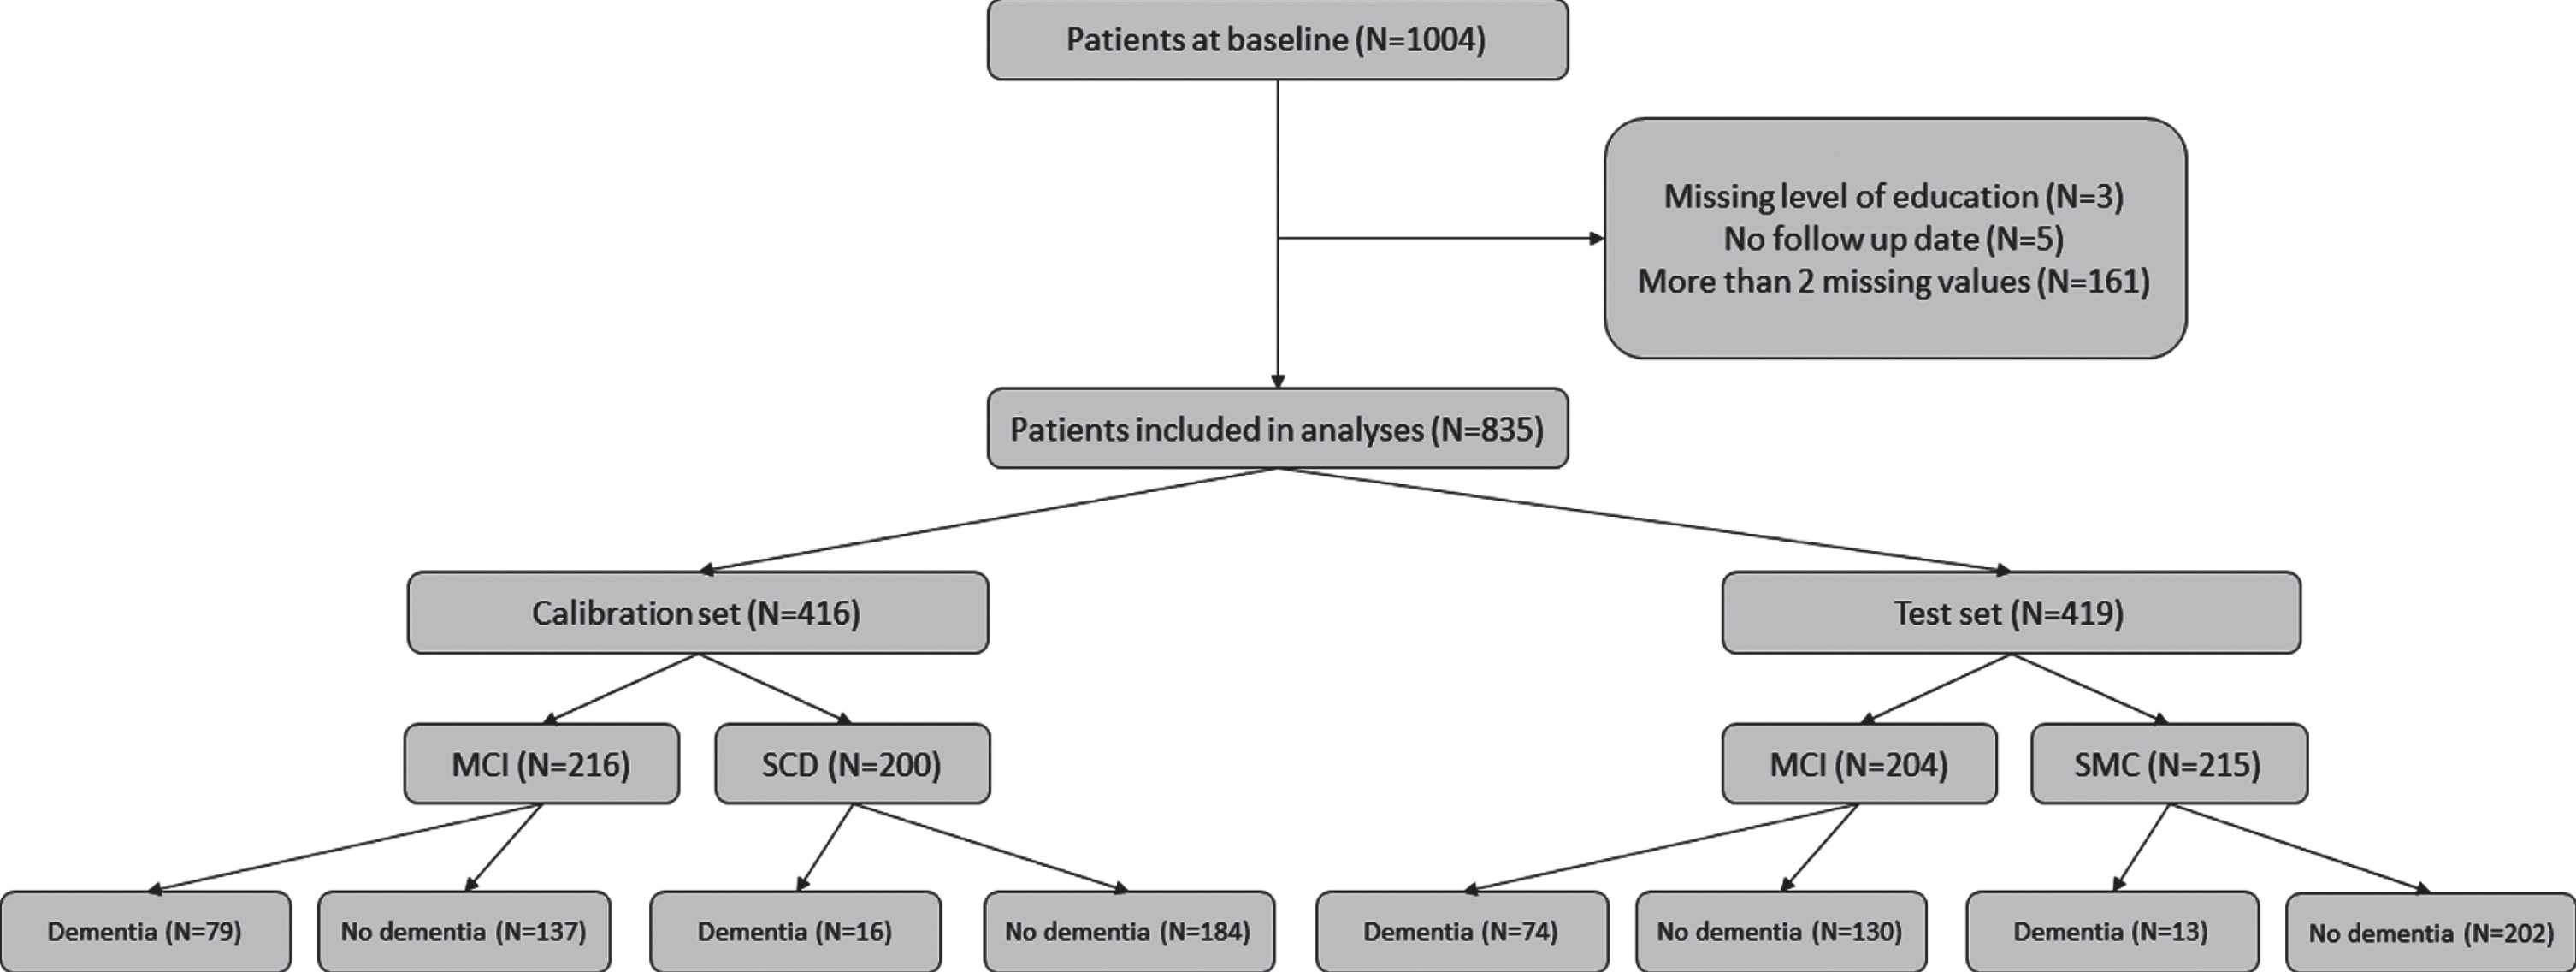 Flow chart describing the inclusion of patients and their progress to dementia over time.